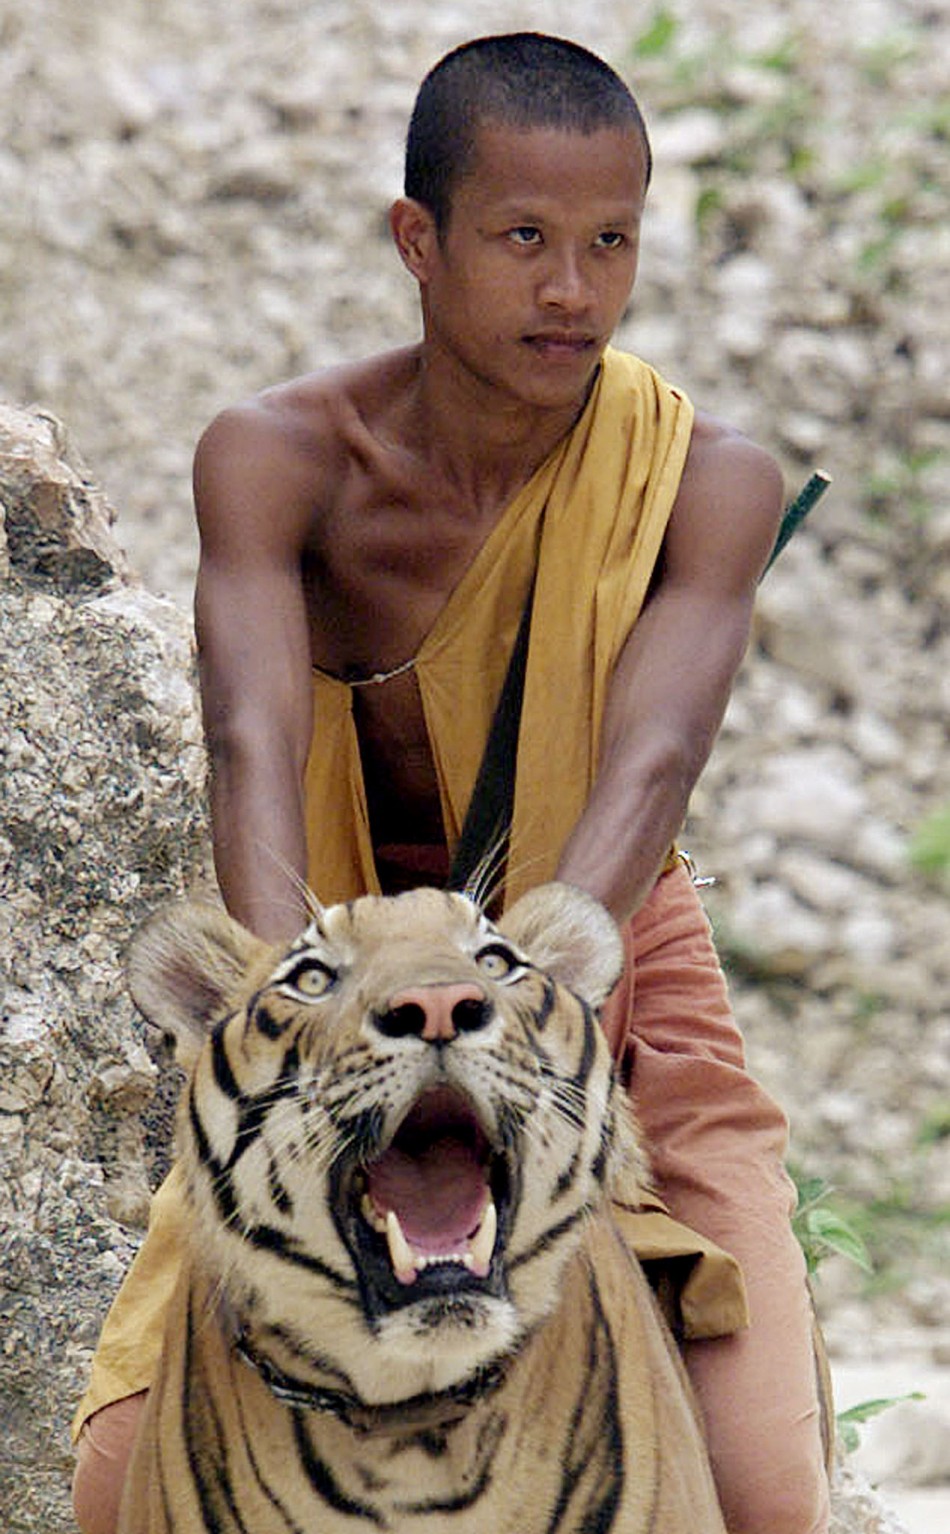 Tiger Temple in Thailand a Growing Tourism Hot Spot Where Wild Stays With the Monks